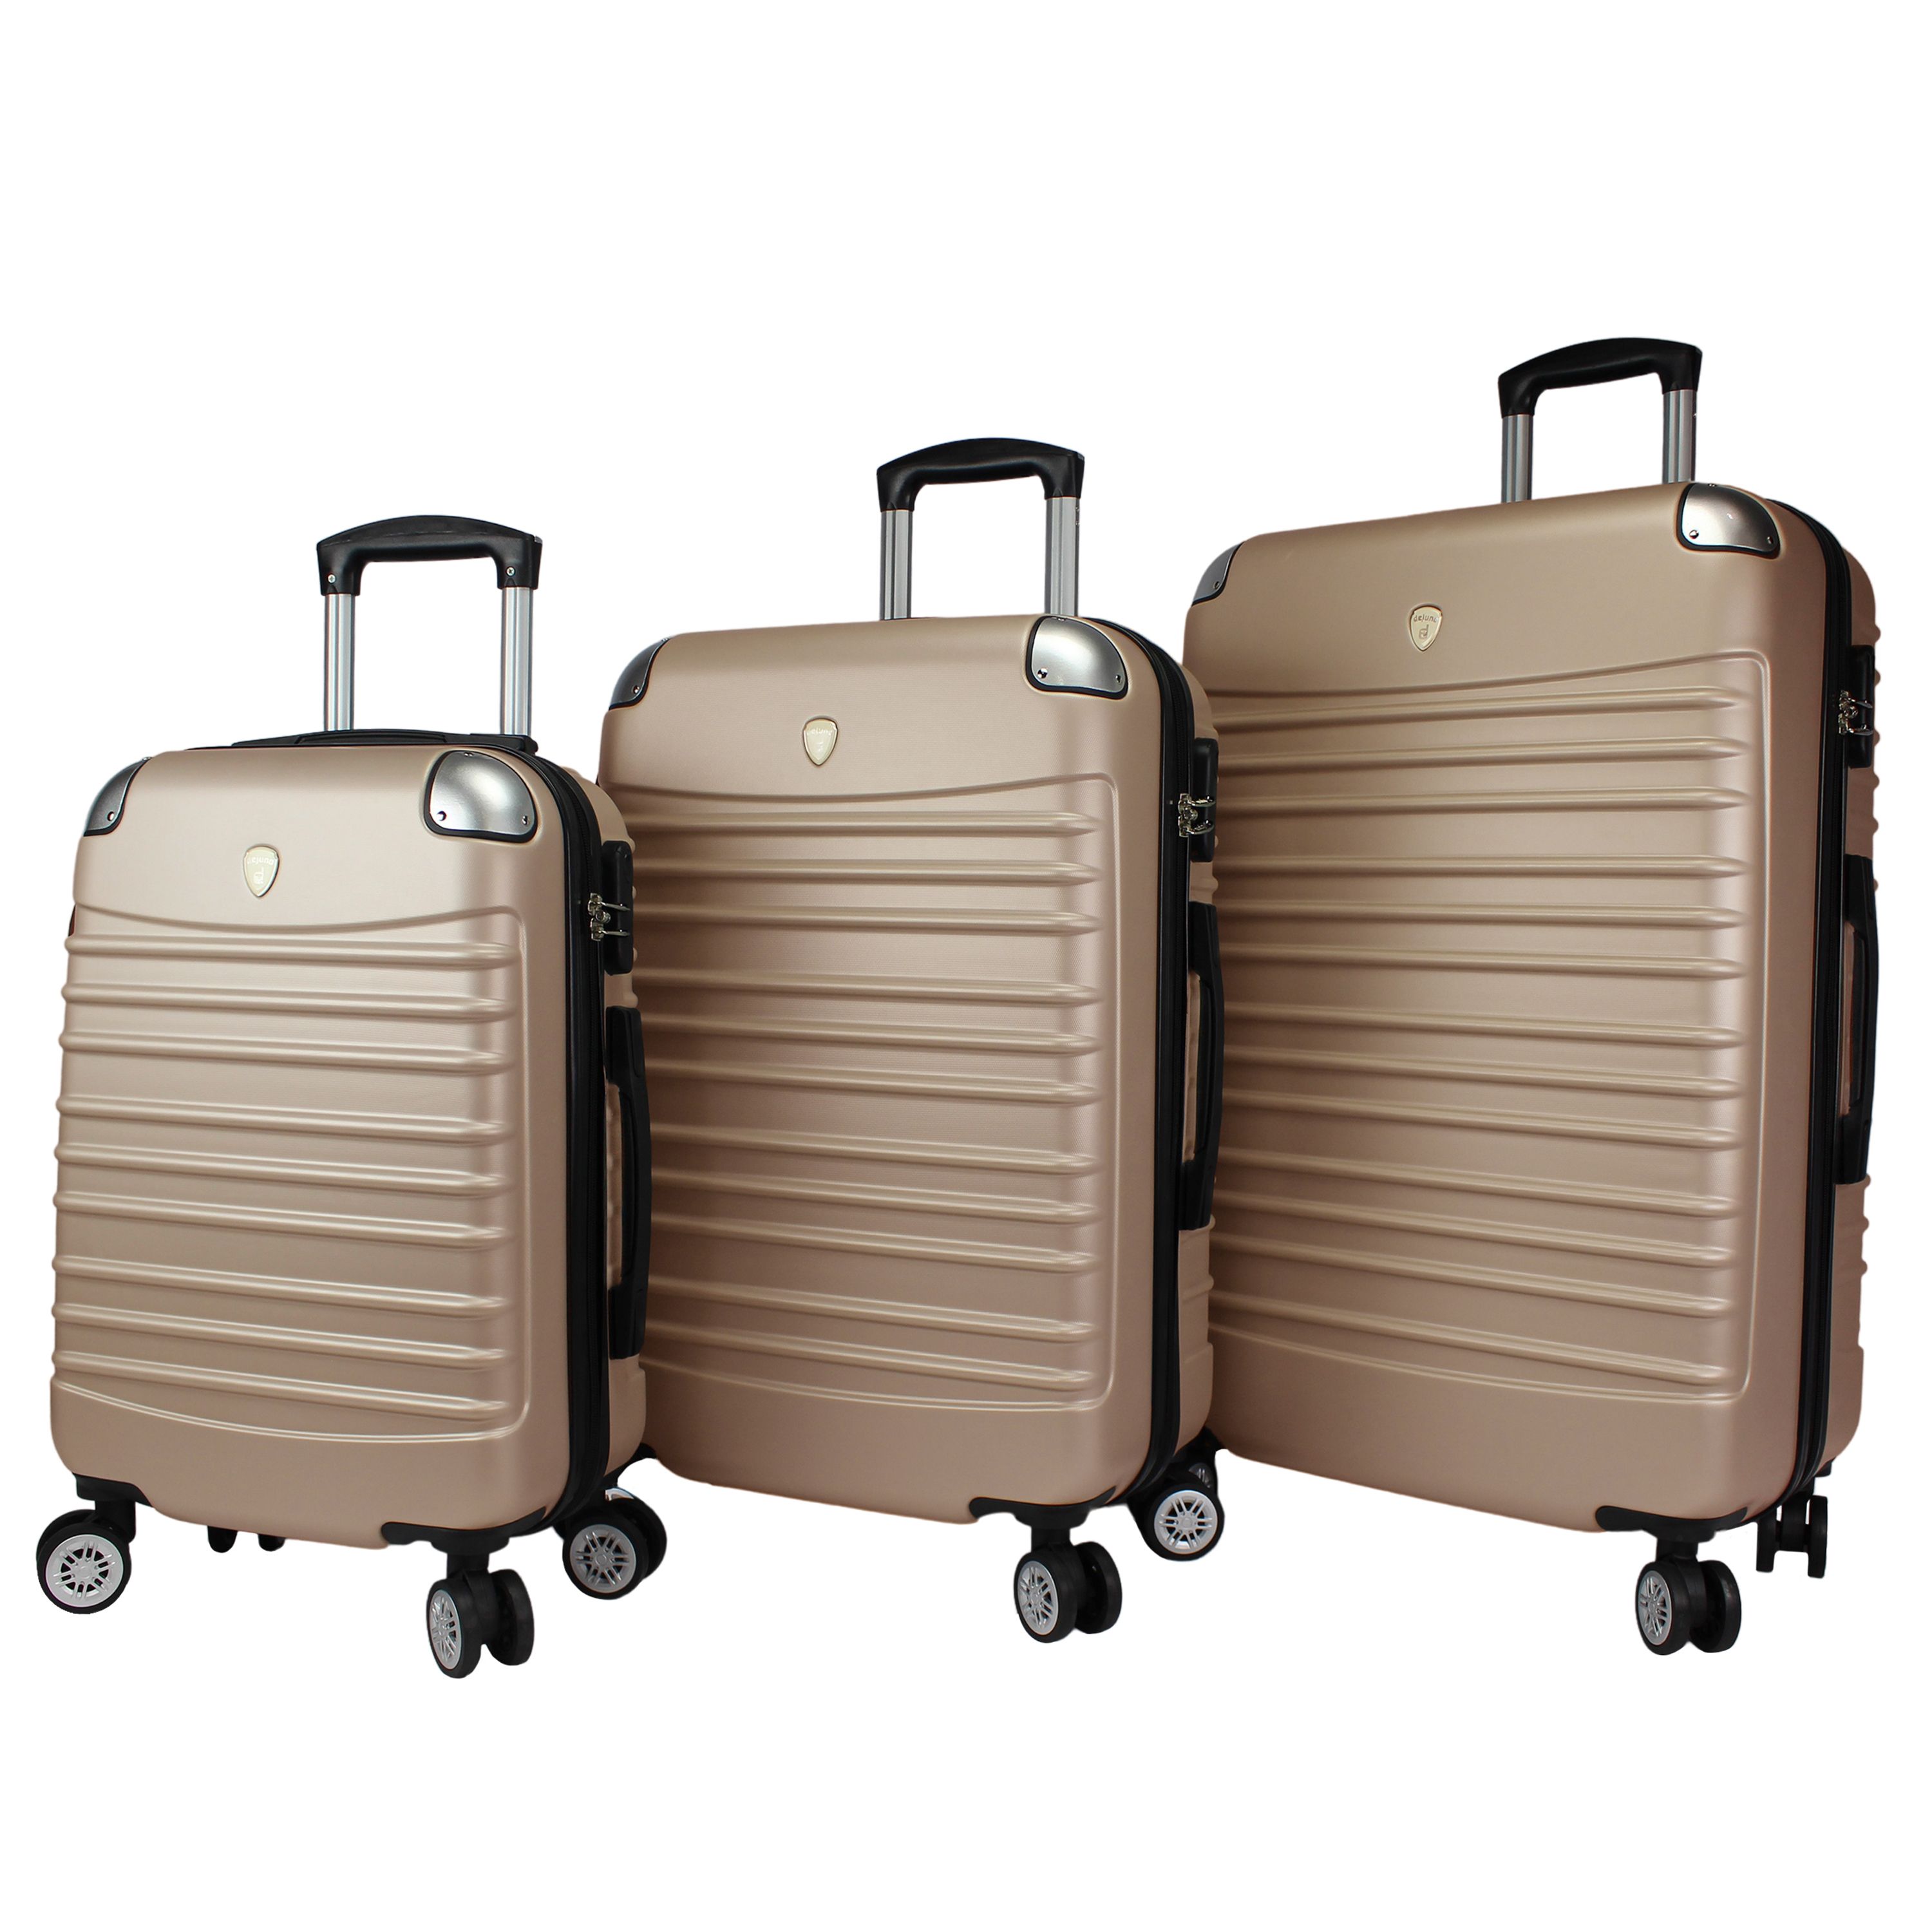 25dj-610-champagne Impact Hardside Spinner Luggage Set - Champagne, 3 Piece